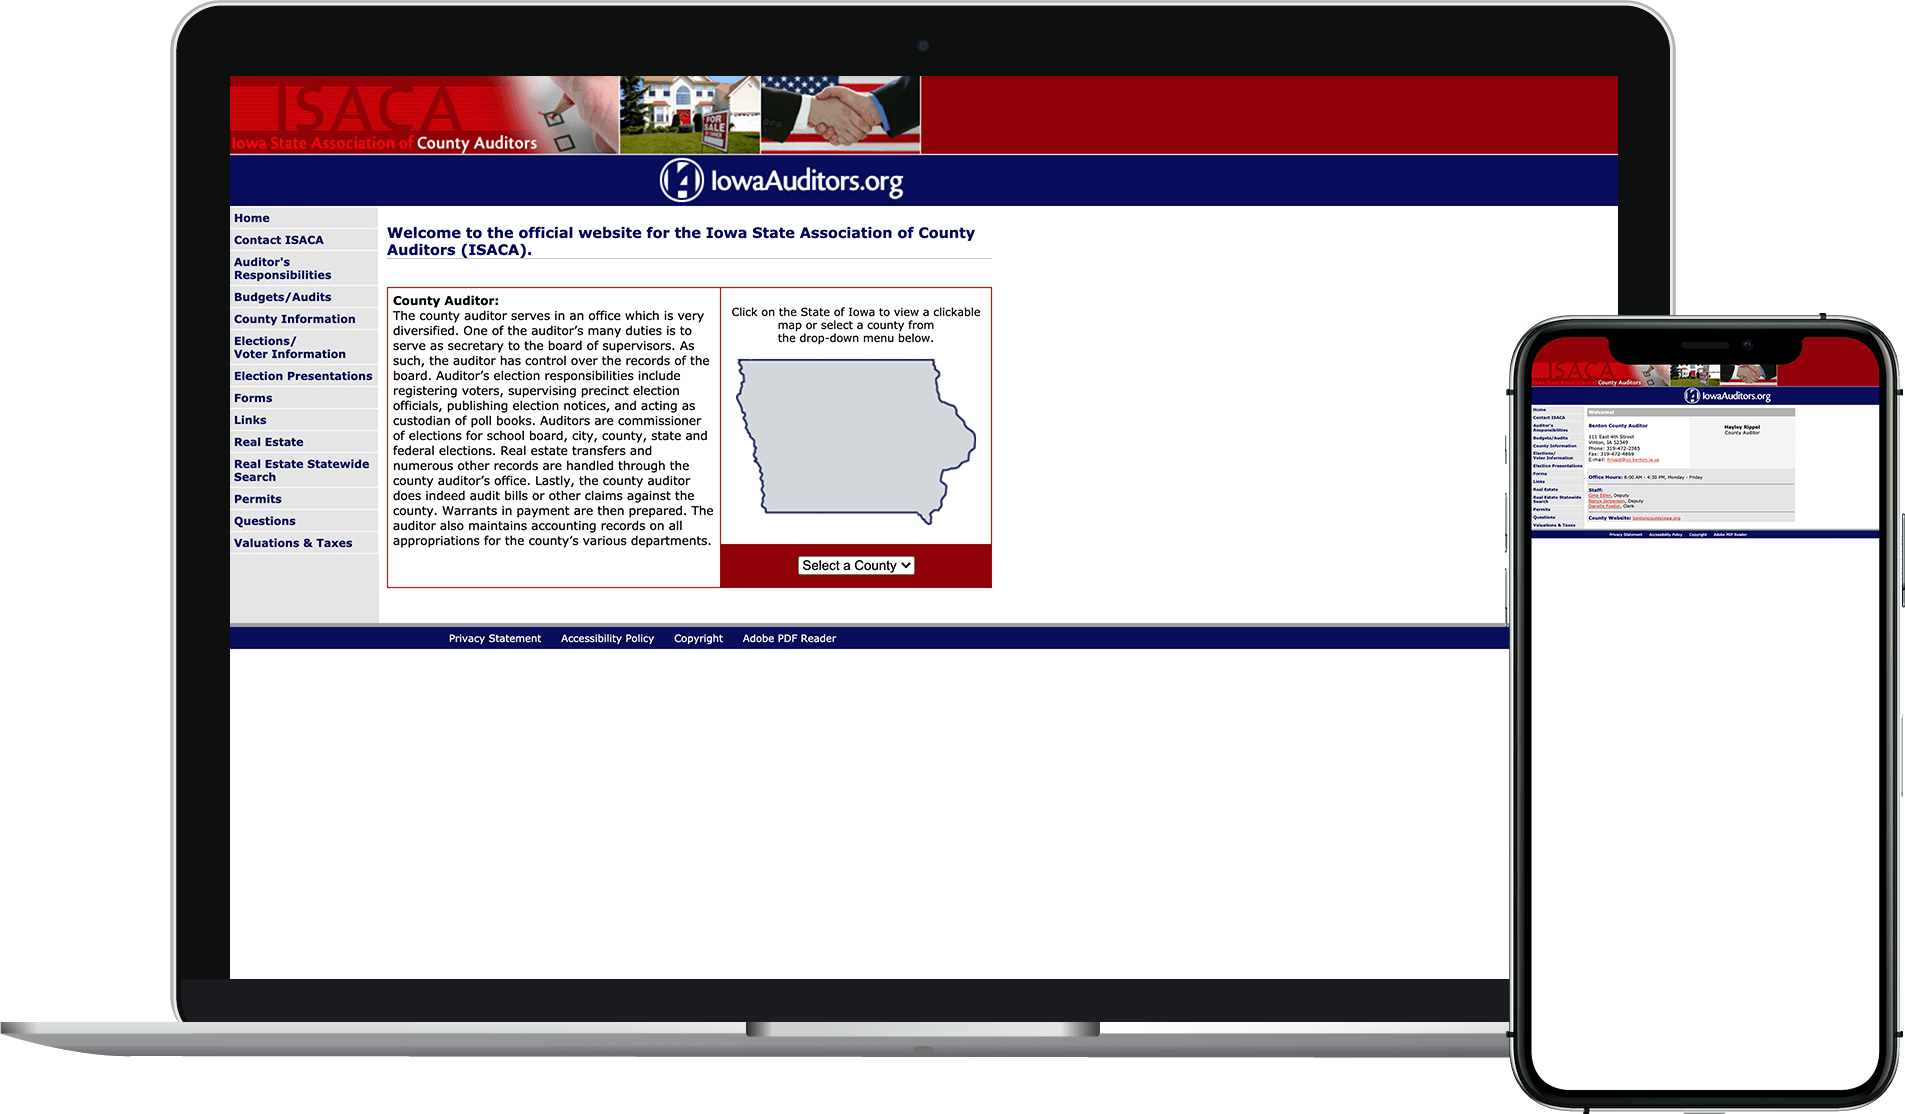 Former website for the Iowa State Association of County Auditors (ISACA)